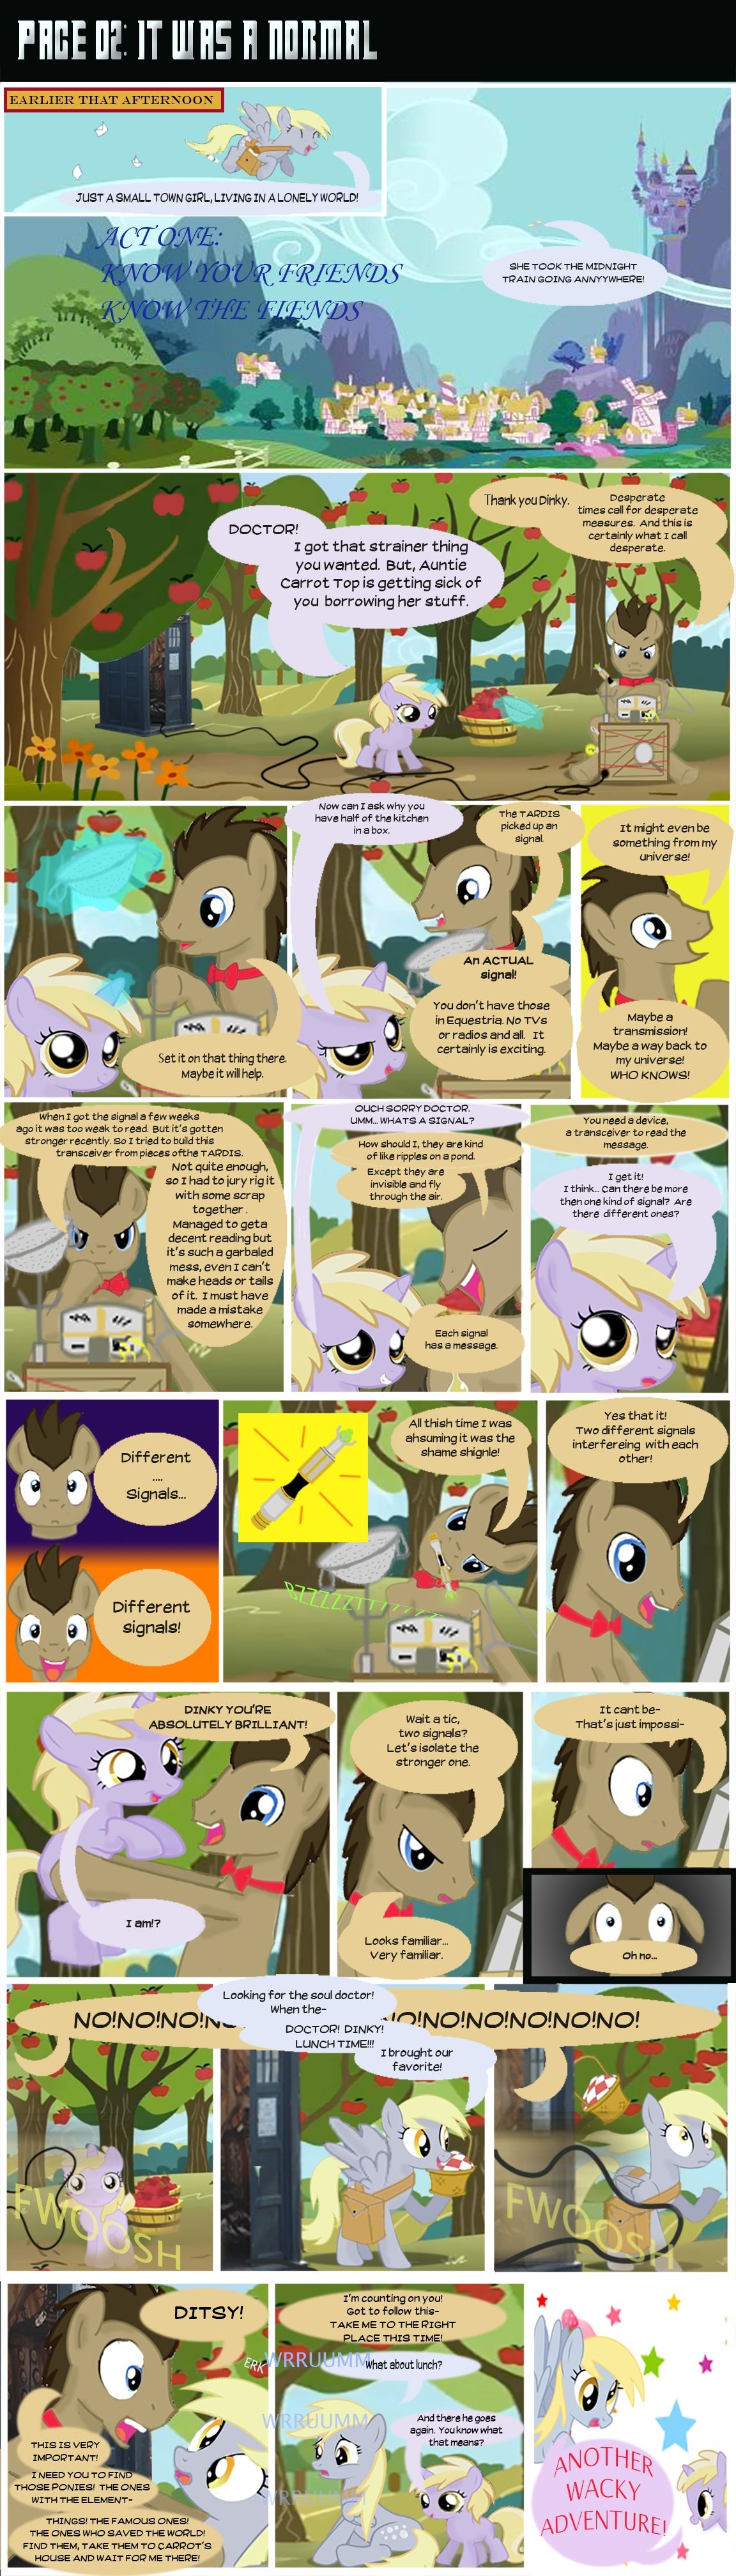 [ShwiggityShwah] Doctor Whooves: Elder (My Little Pony: Friendship is Magic) [English] [Ongoing] 1